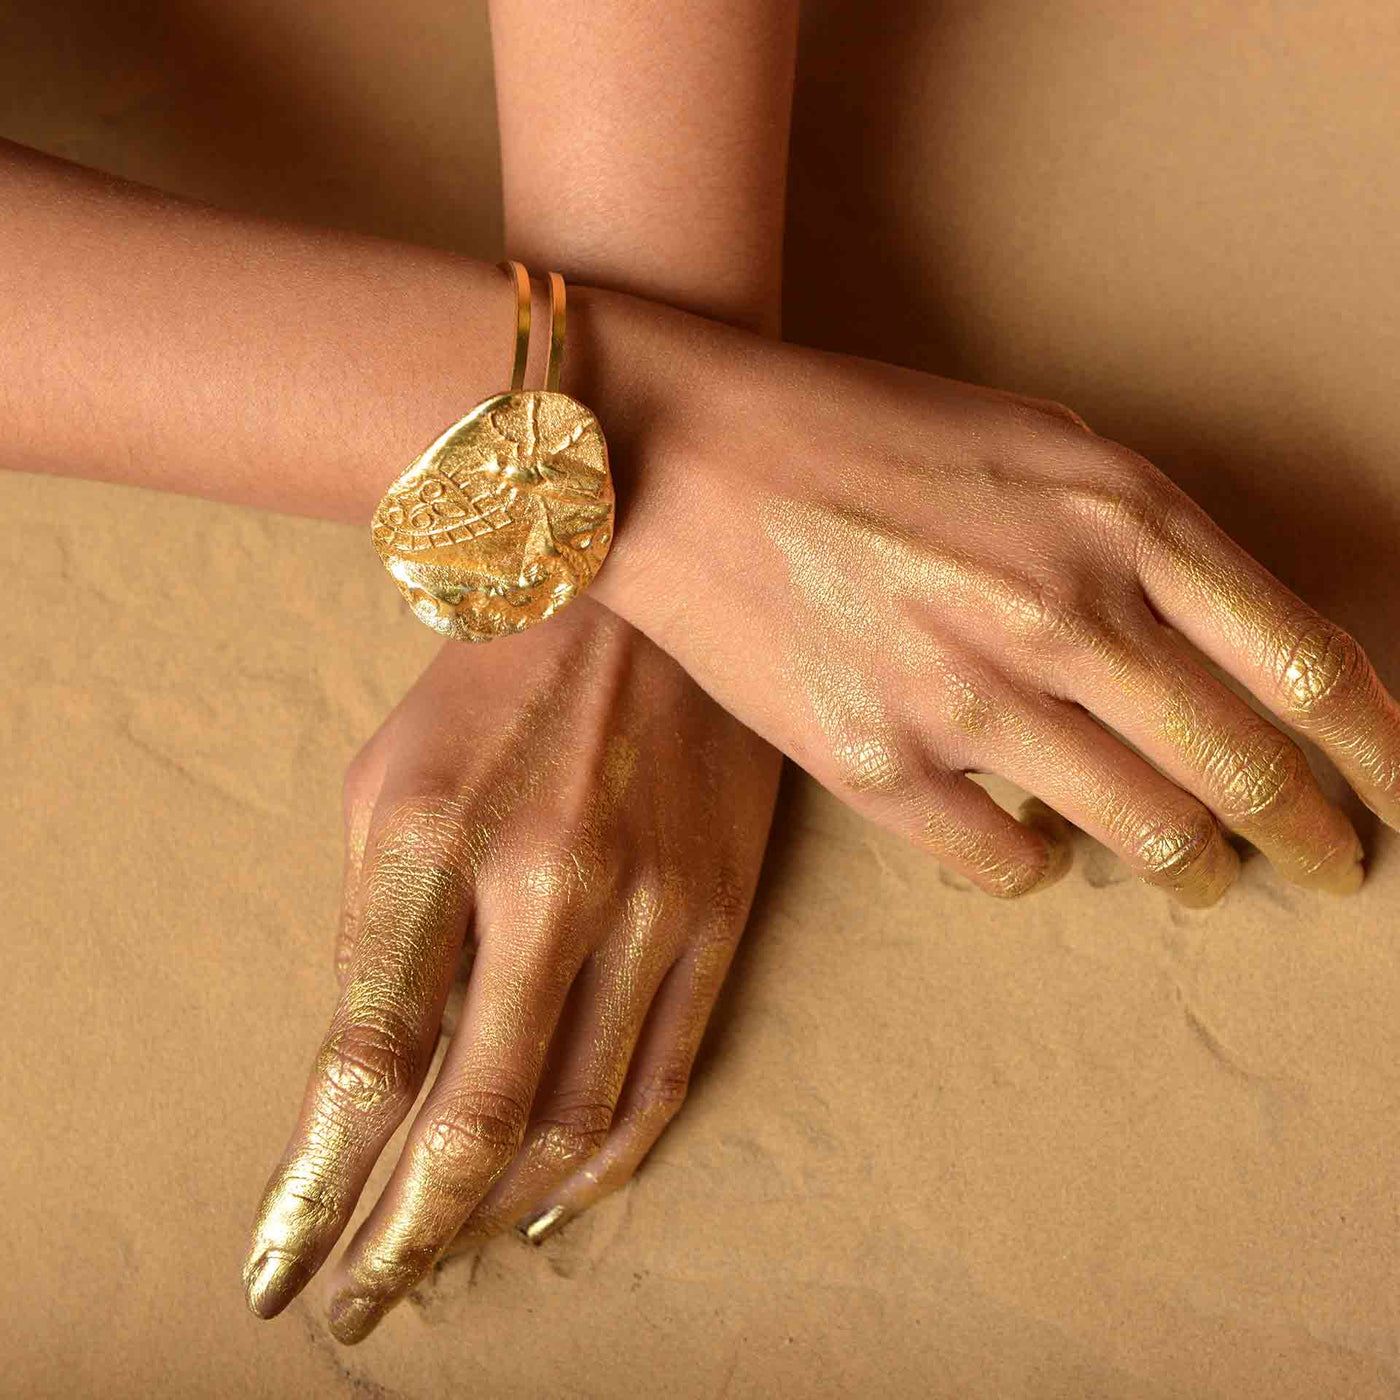 A double cuffed dye gold bracelet which is reminiscent of a fossil.